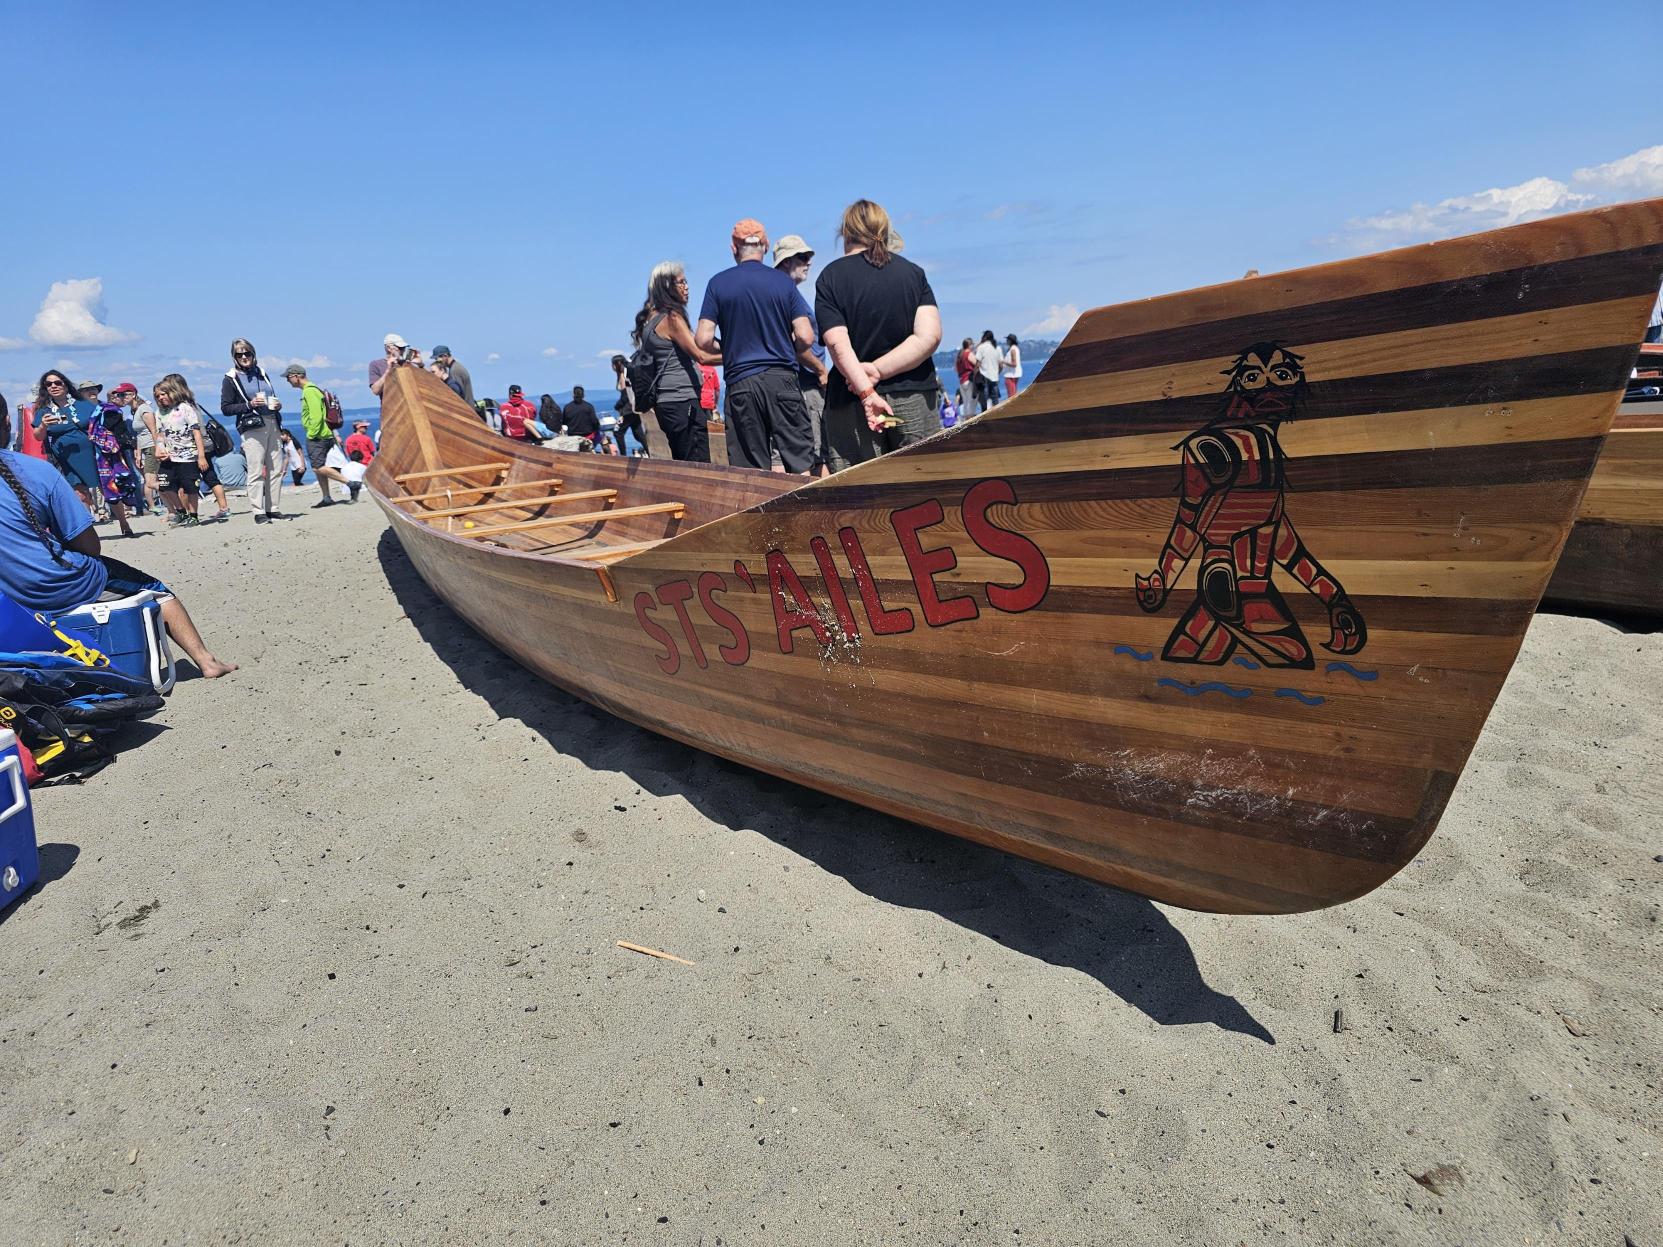 The Stt'ailes Nation canoe — they reside five hours north of Vancouver, British Columbia. // CREDIT: Tracci Dial, NWPB